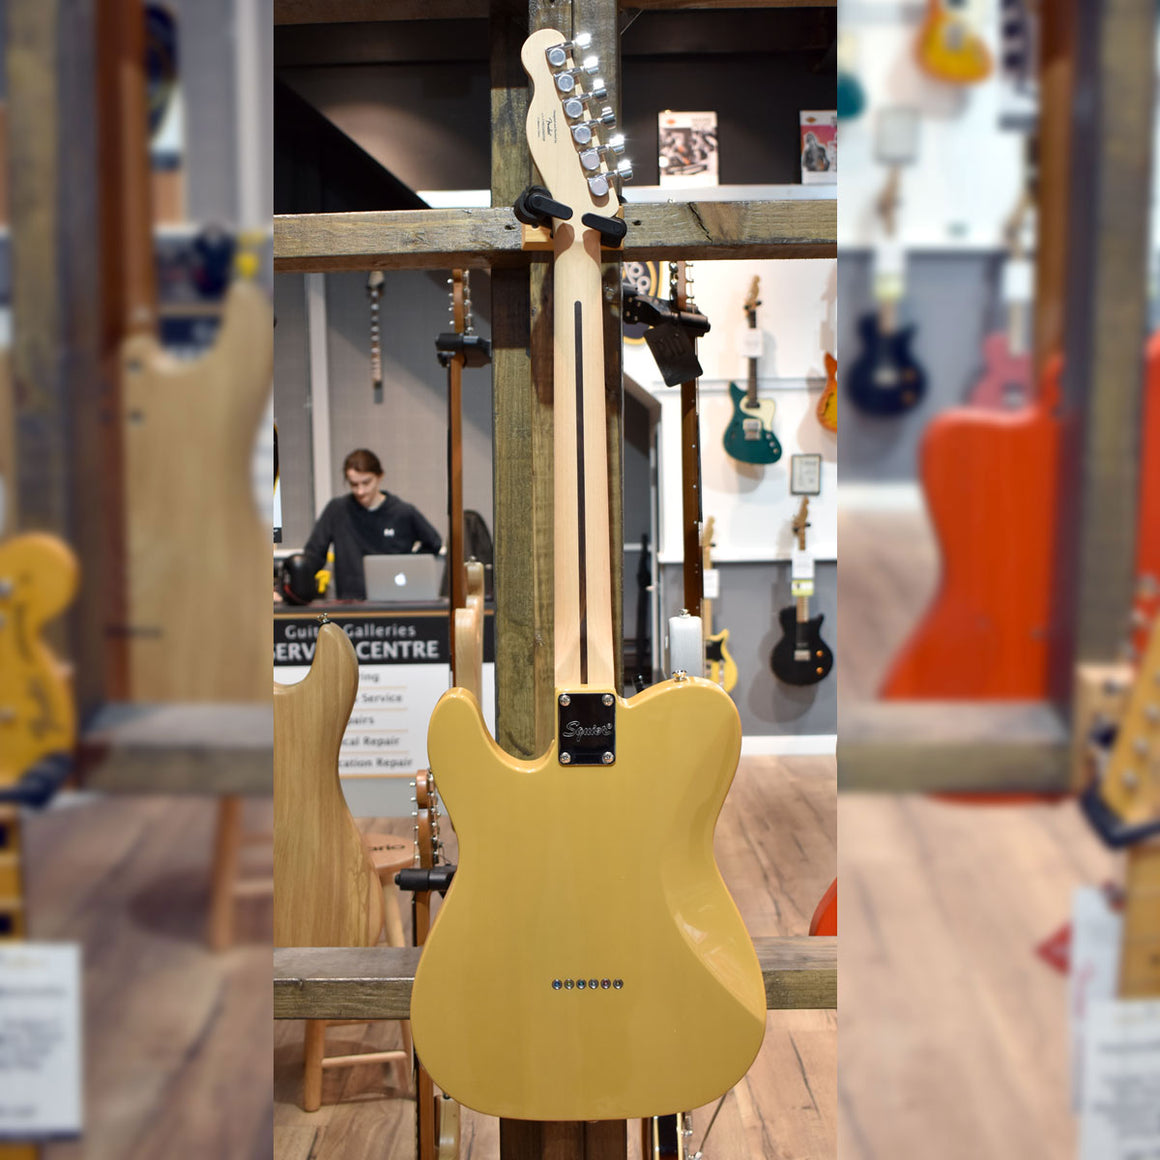 Squier Affinity Telecaster Butterscotch Blonde Electric Guitar